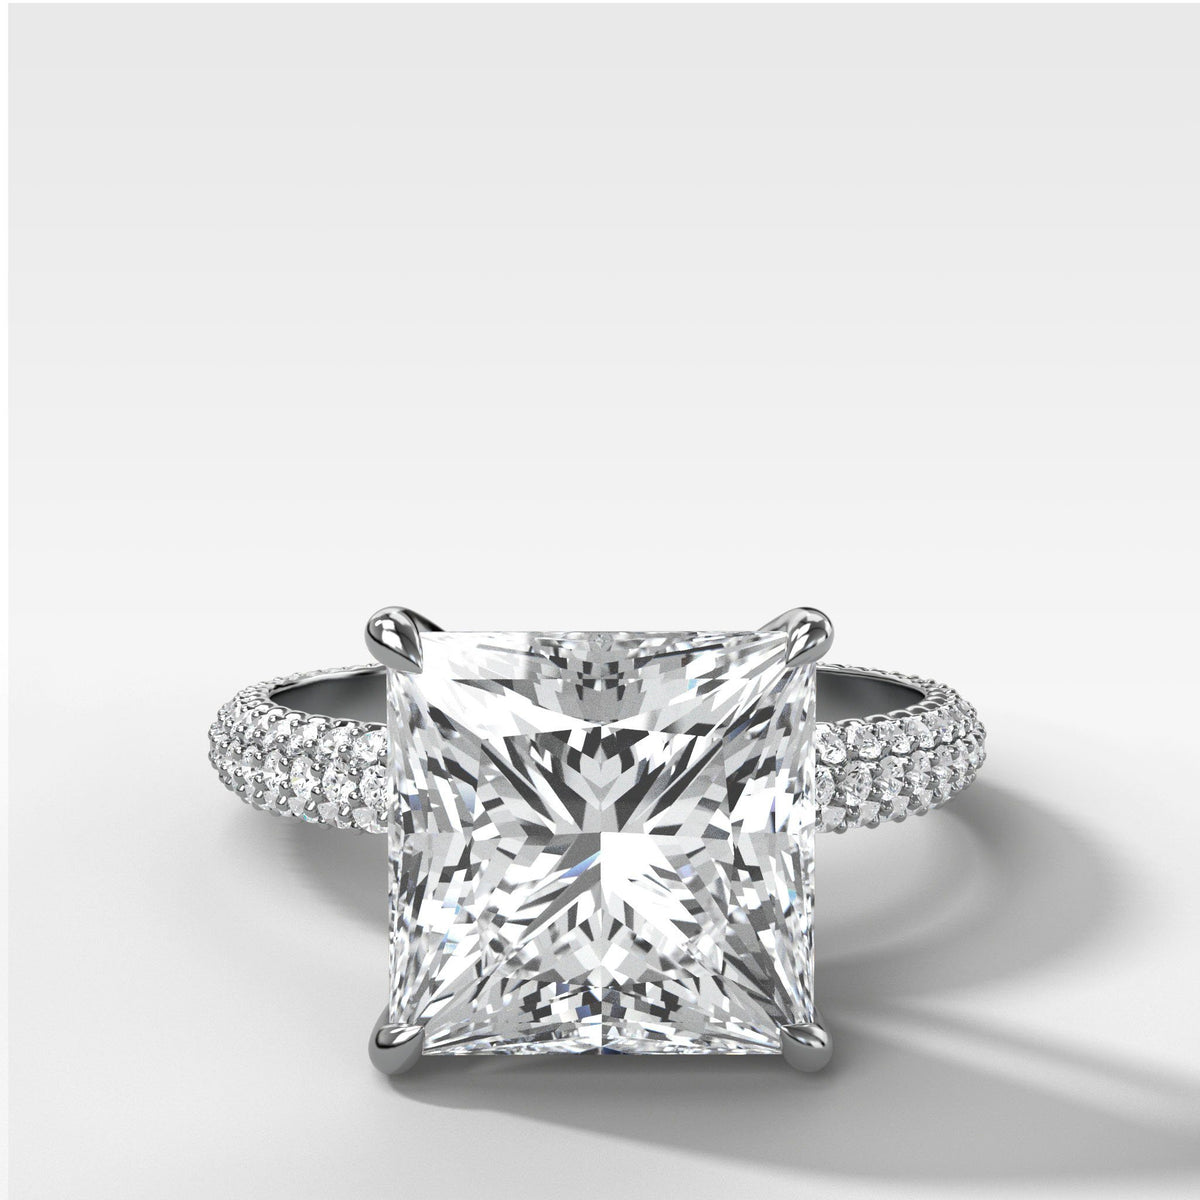 Triple Row Pavé Engagement Ring With Princess Cut by Good Stone in White Gold